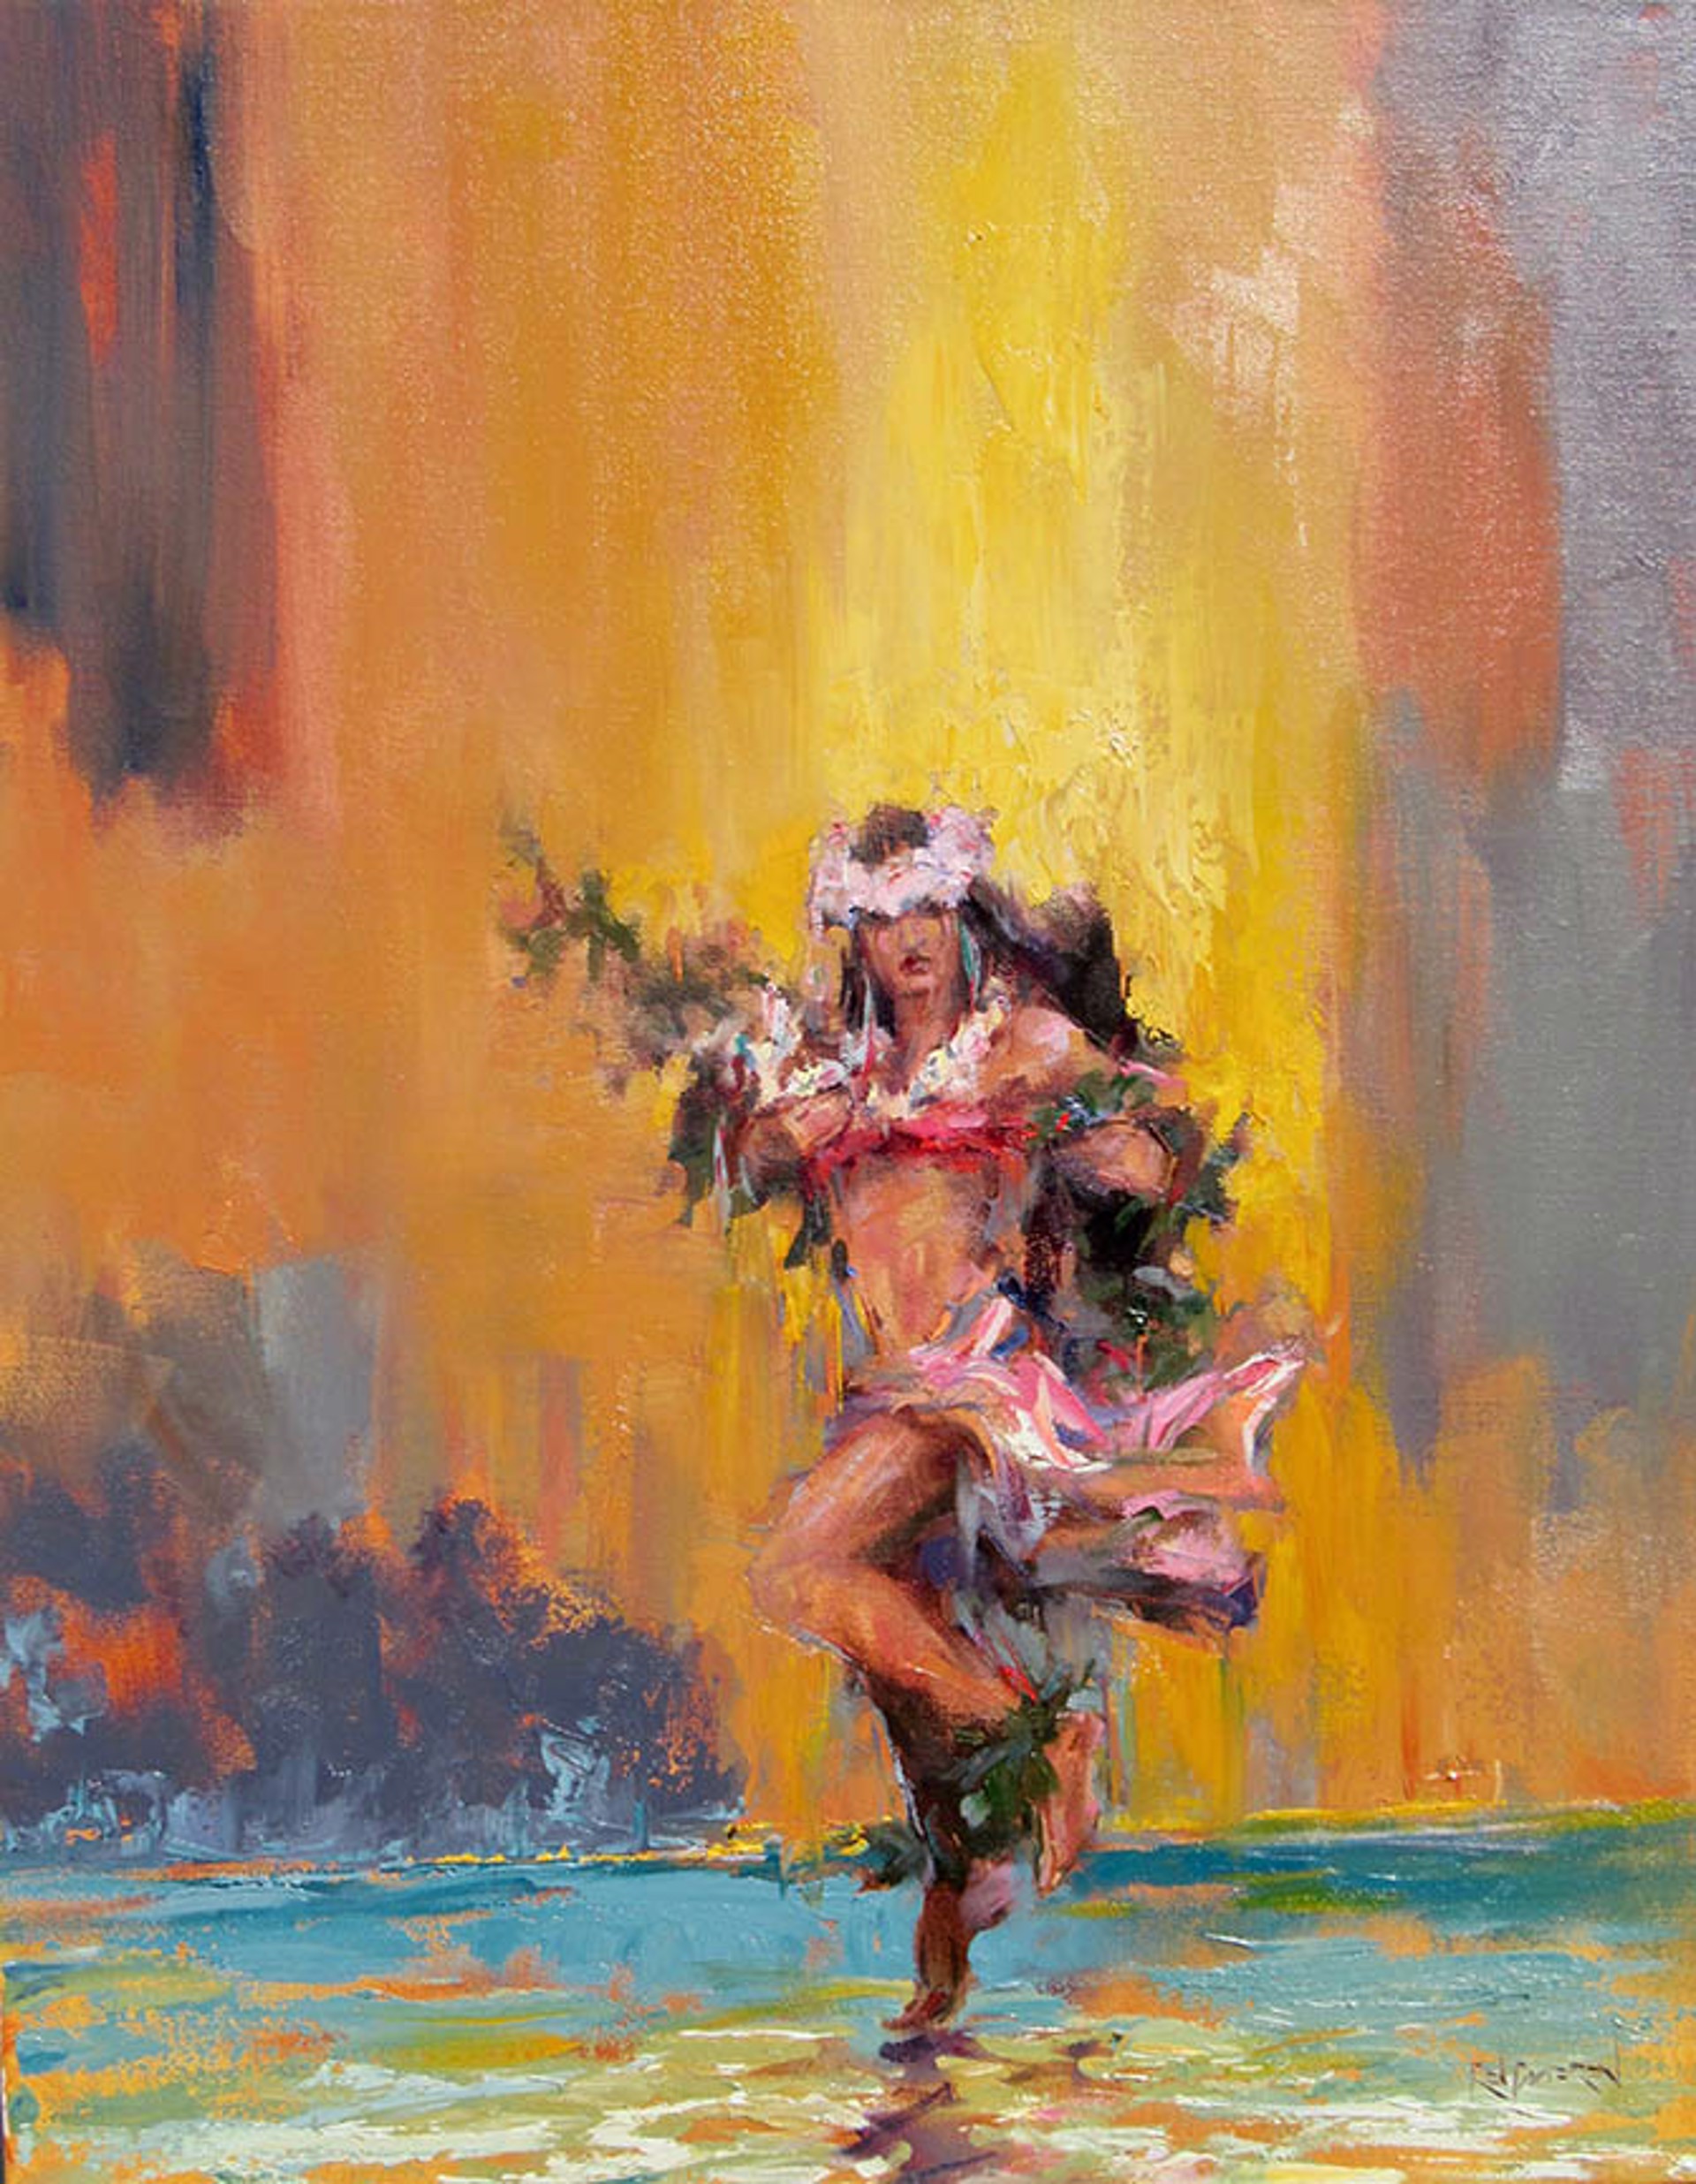 Hula Dancer In Light - Sold by Commission Possibilities / Previously Sold ZX